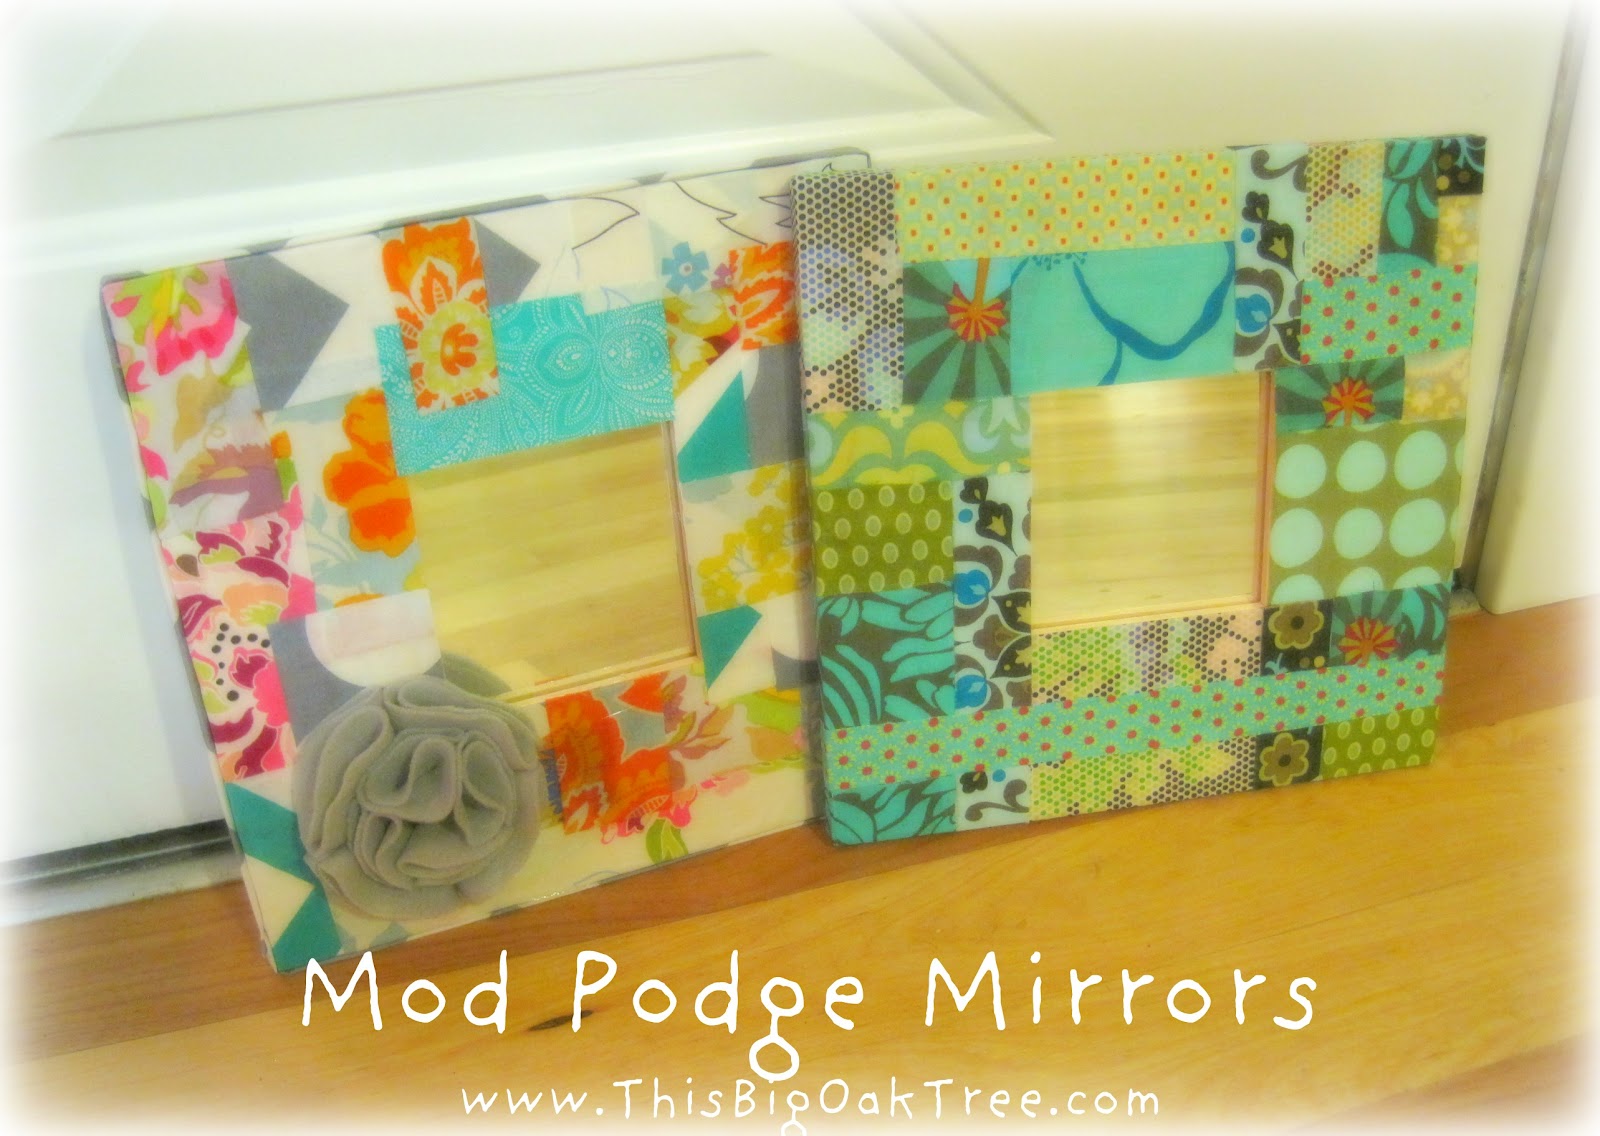 This fun diy project was done using Fabric Mod Podge. You can use virt